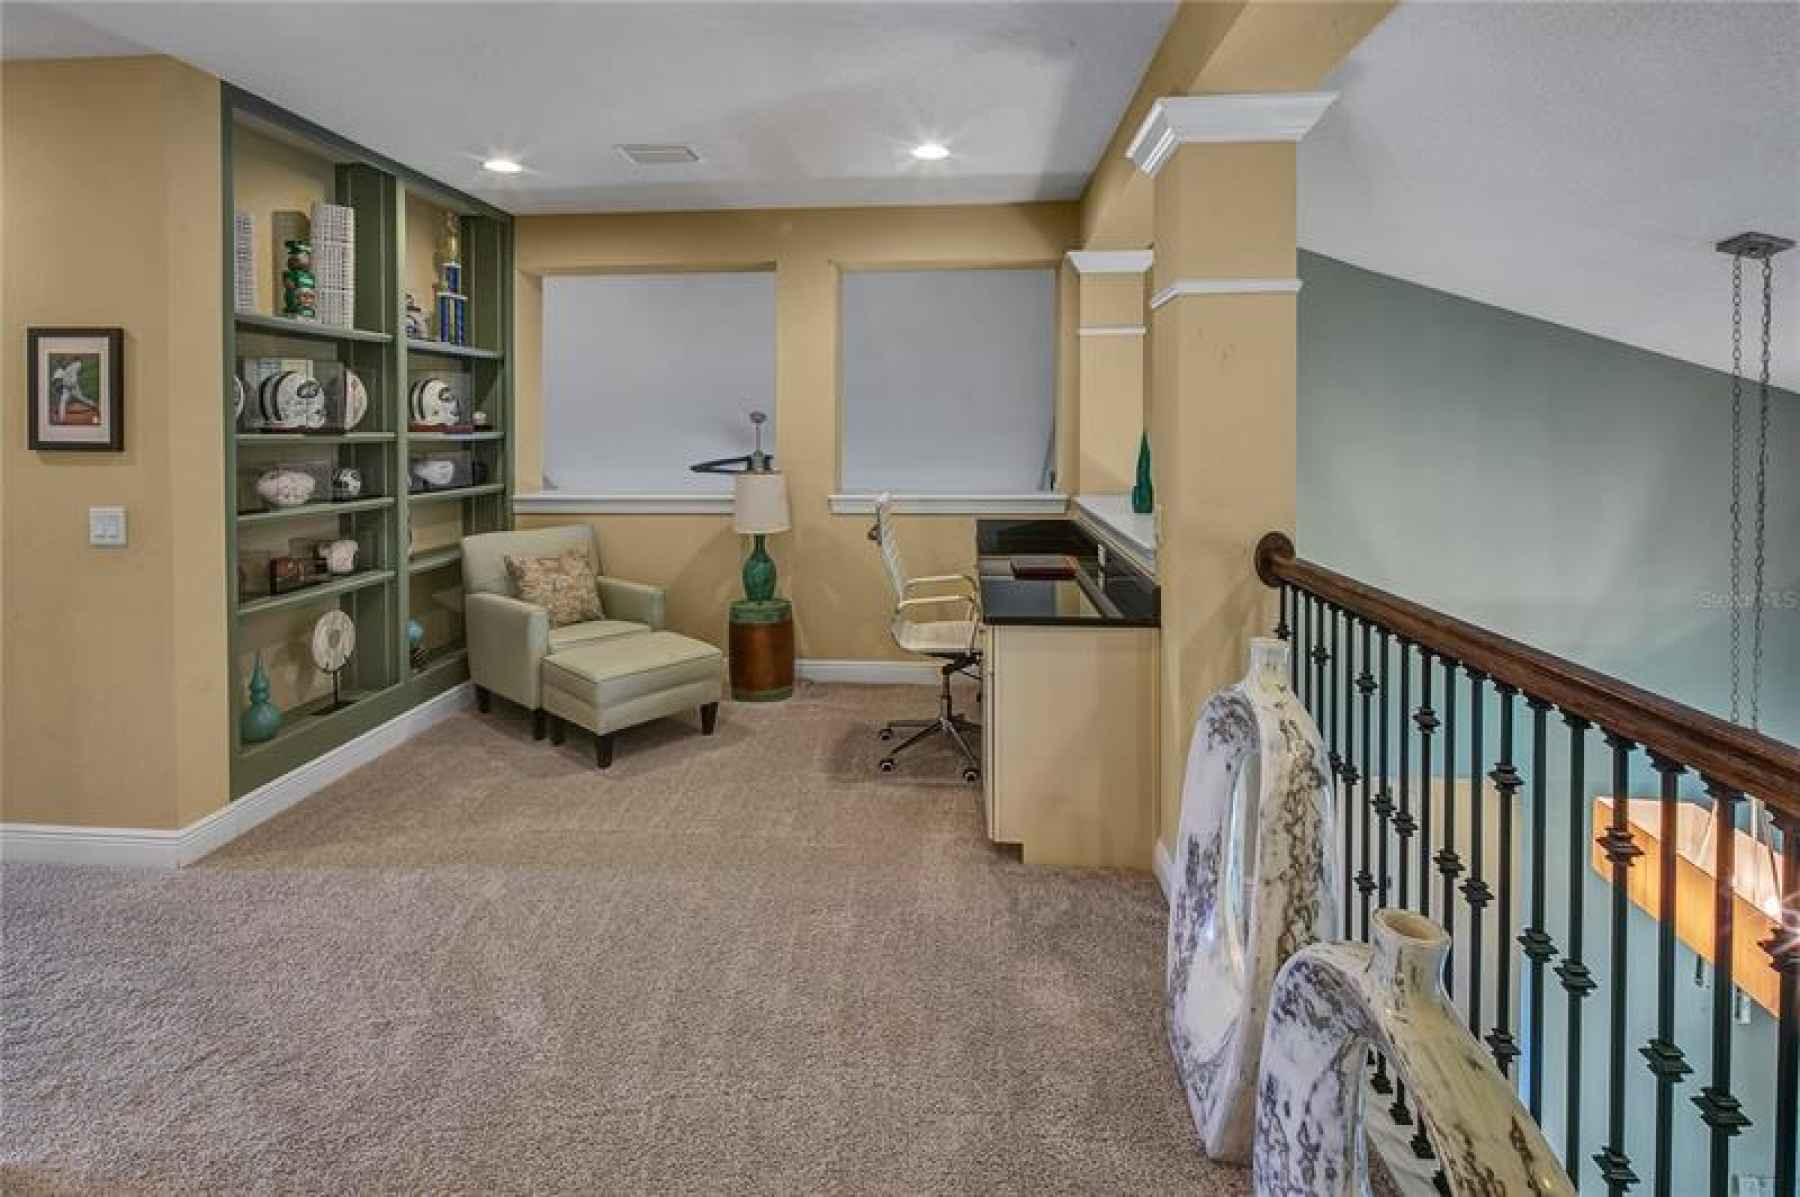 Study with built in book shelf and desk. Overlooking the Breakfast Nook and Family Room.